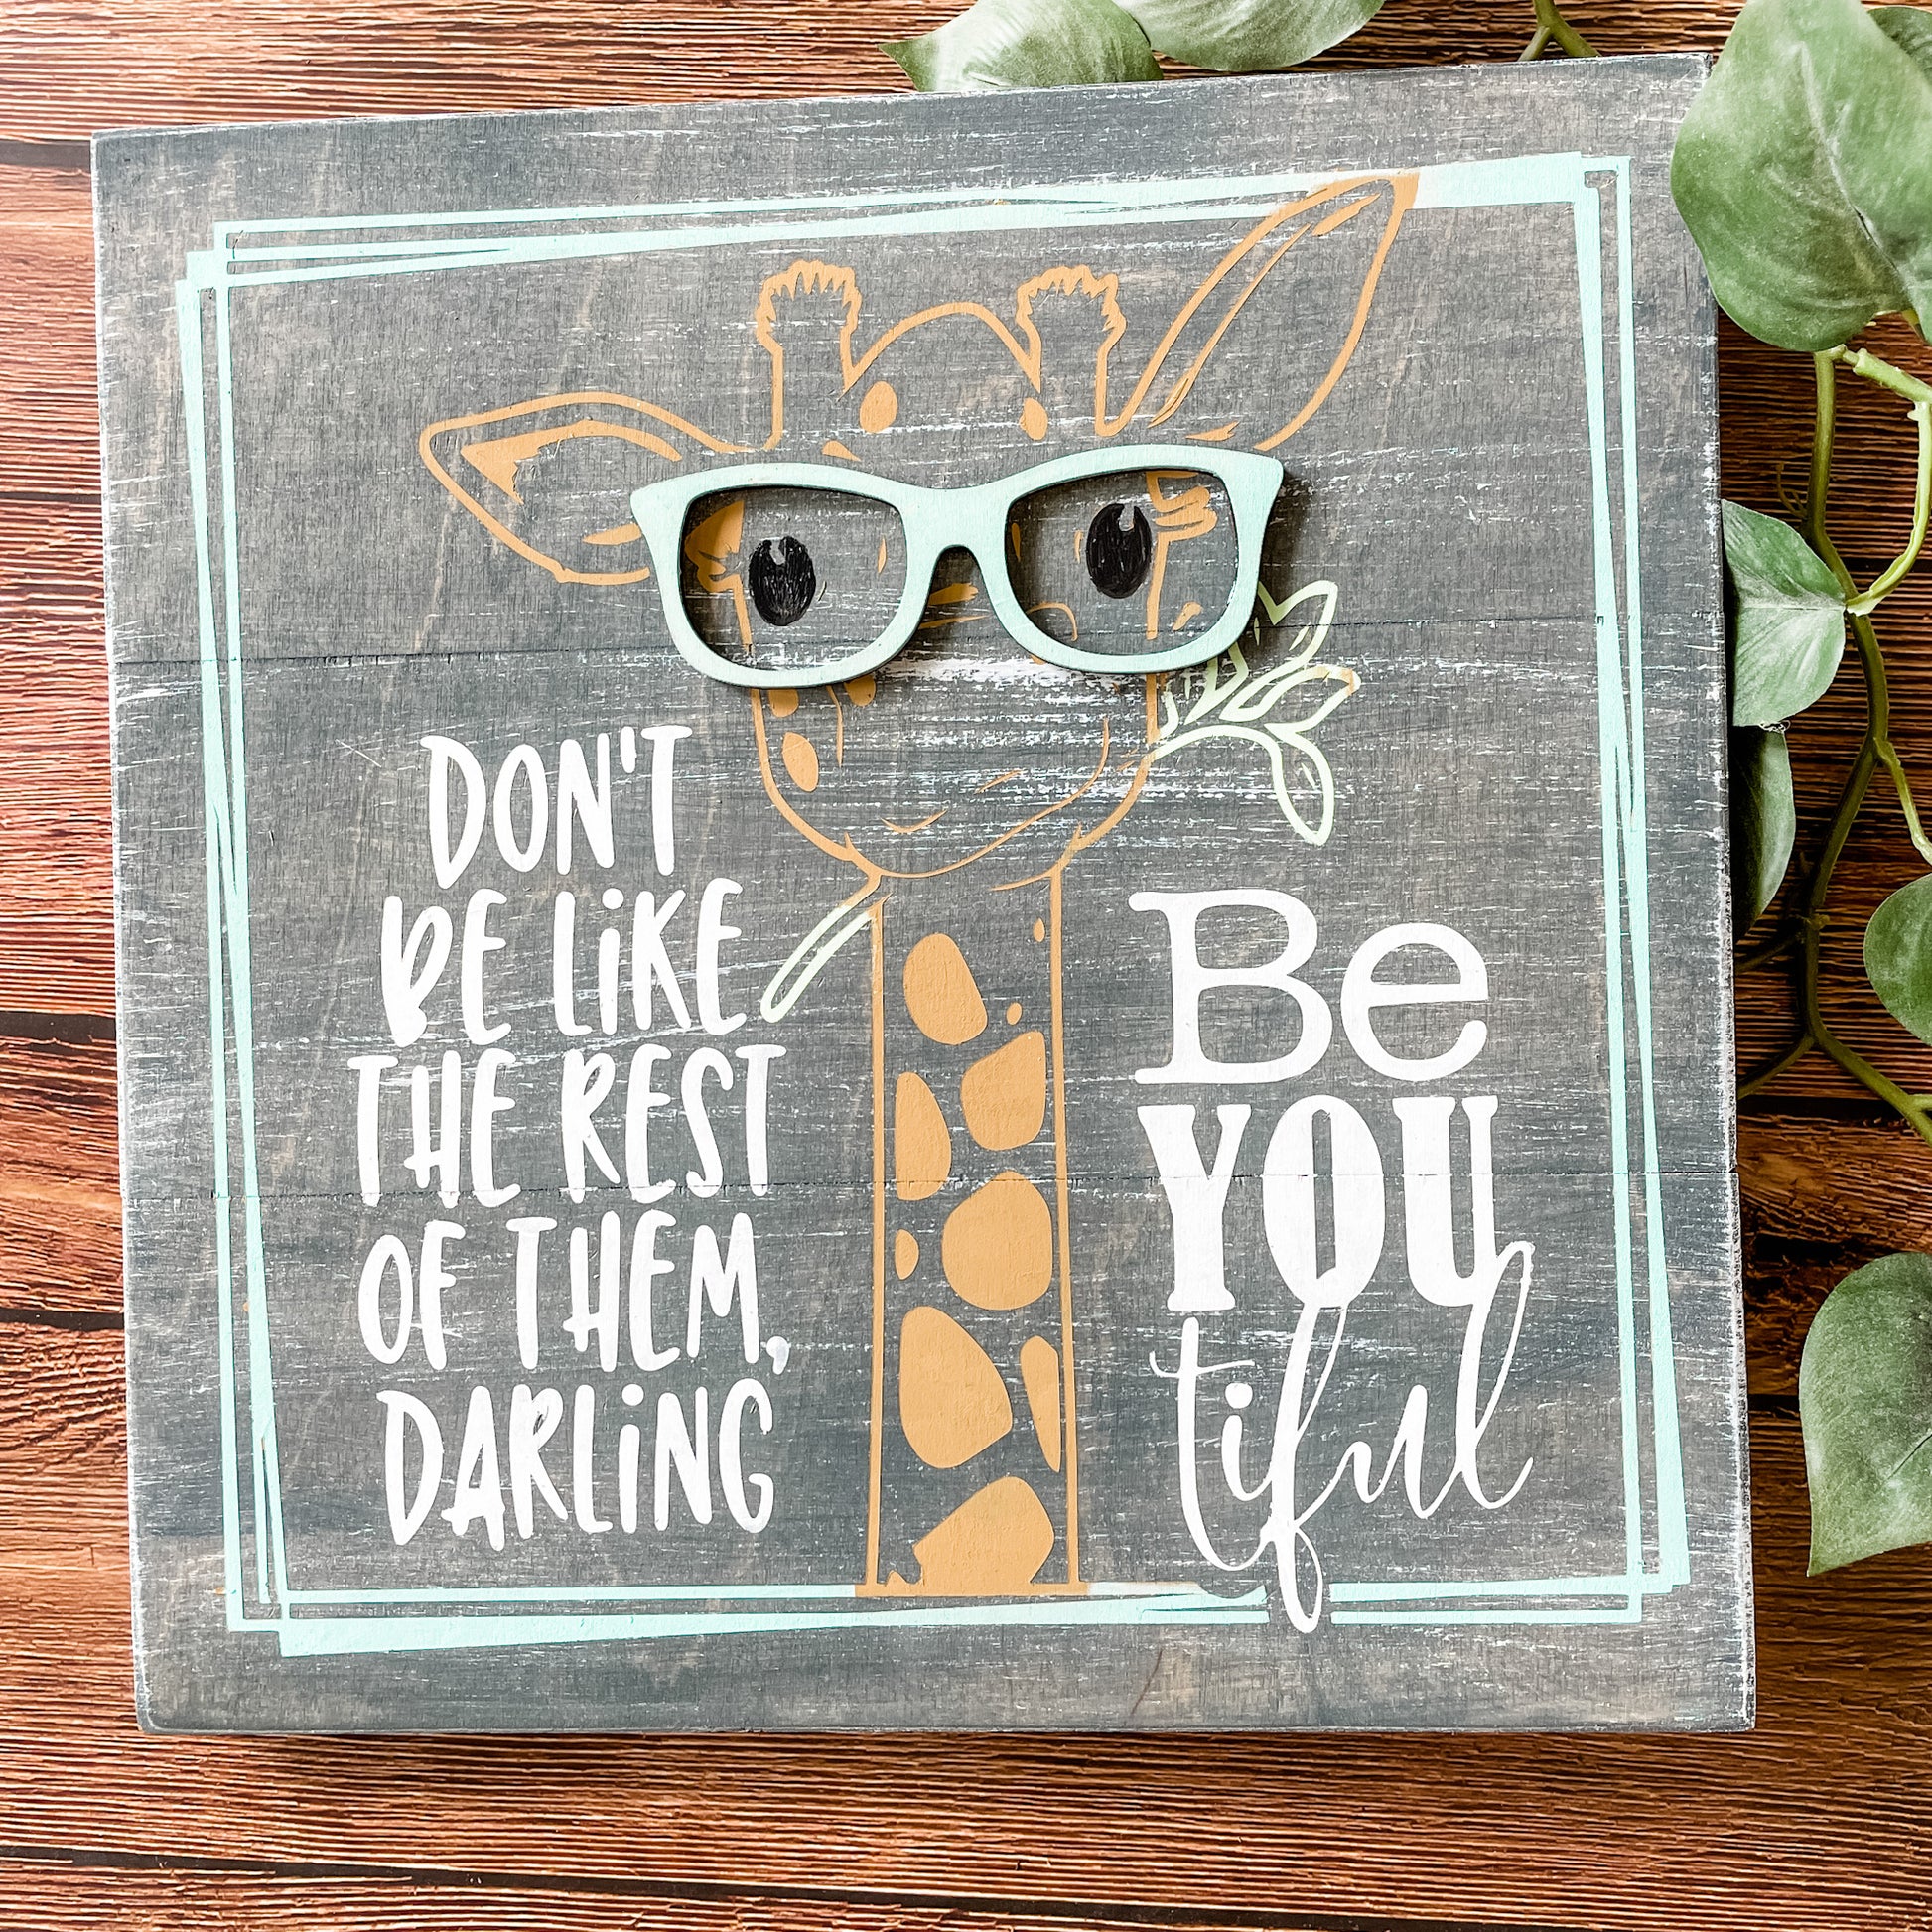 Don't Be Like the Rest of Them Darling: SQUARE DESIGN - Paisley Grace Makery